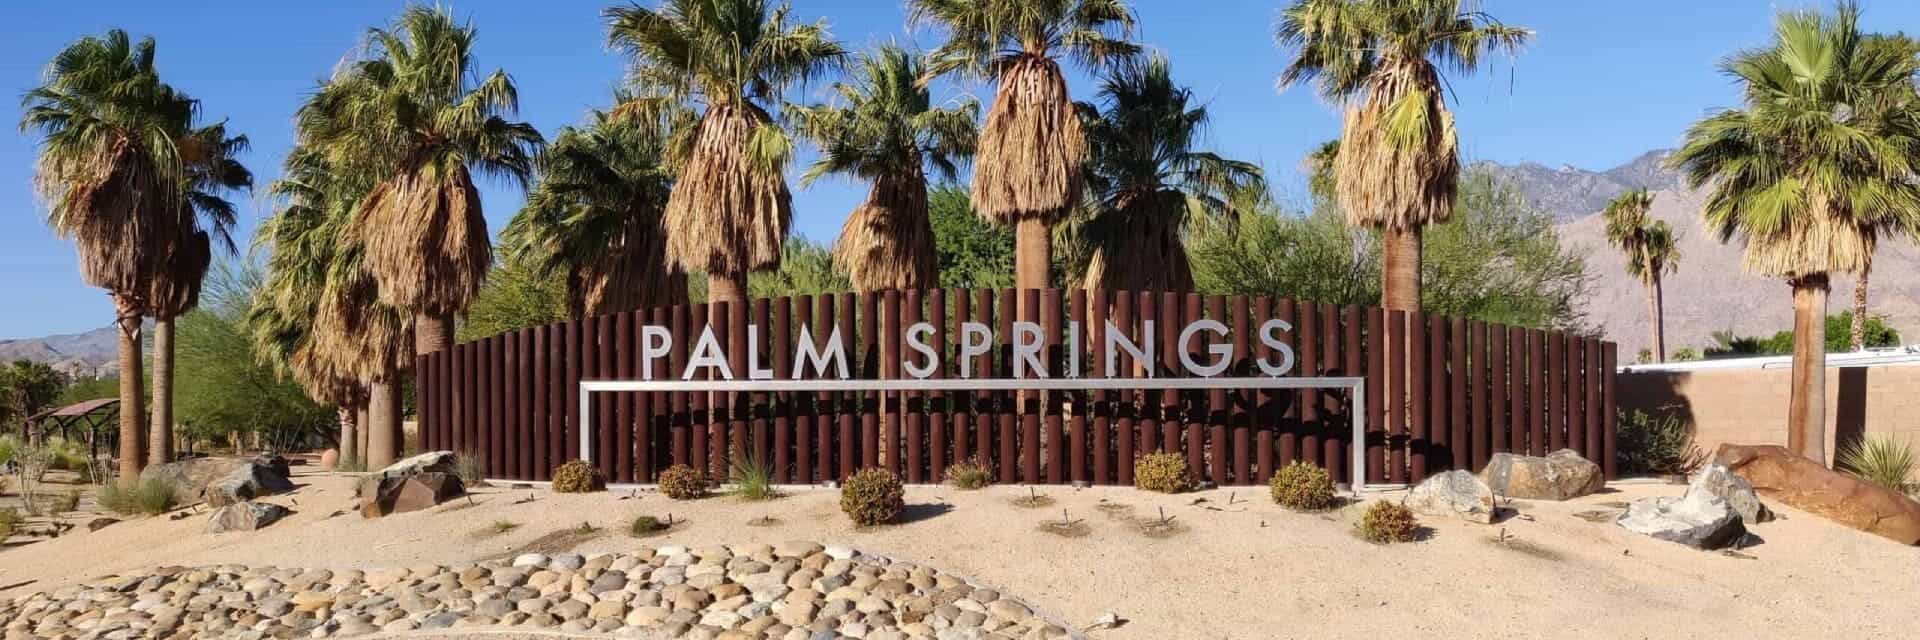 new_palm-springs-sign